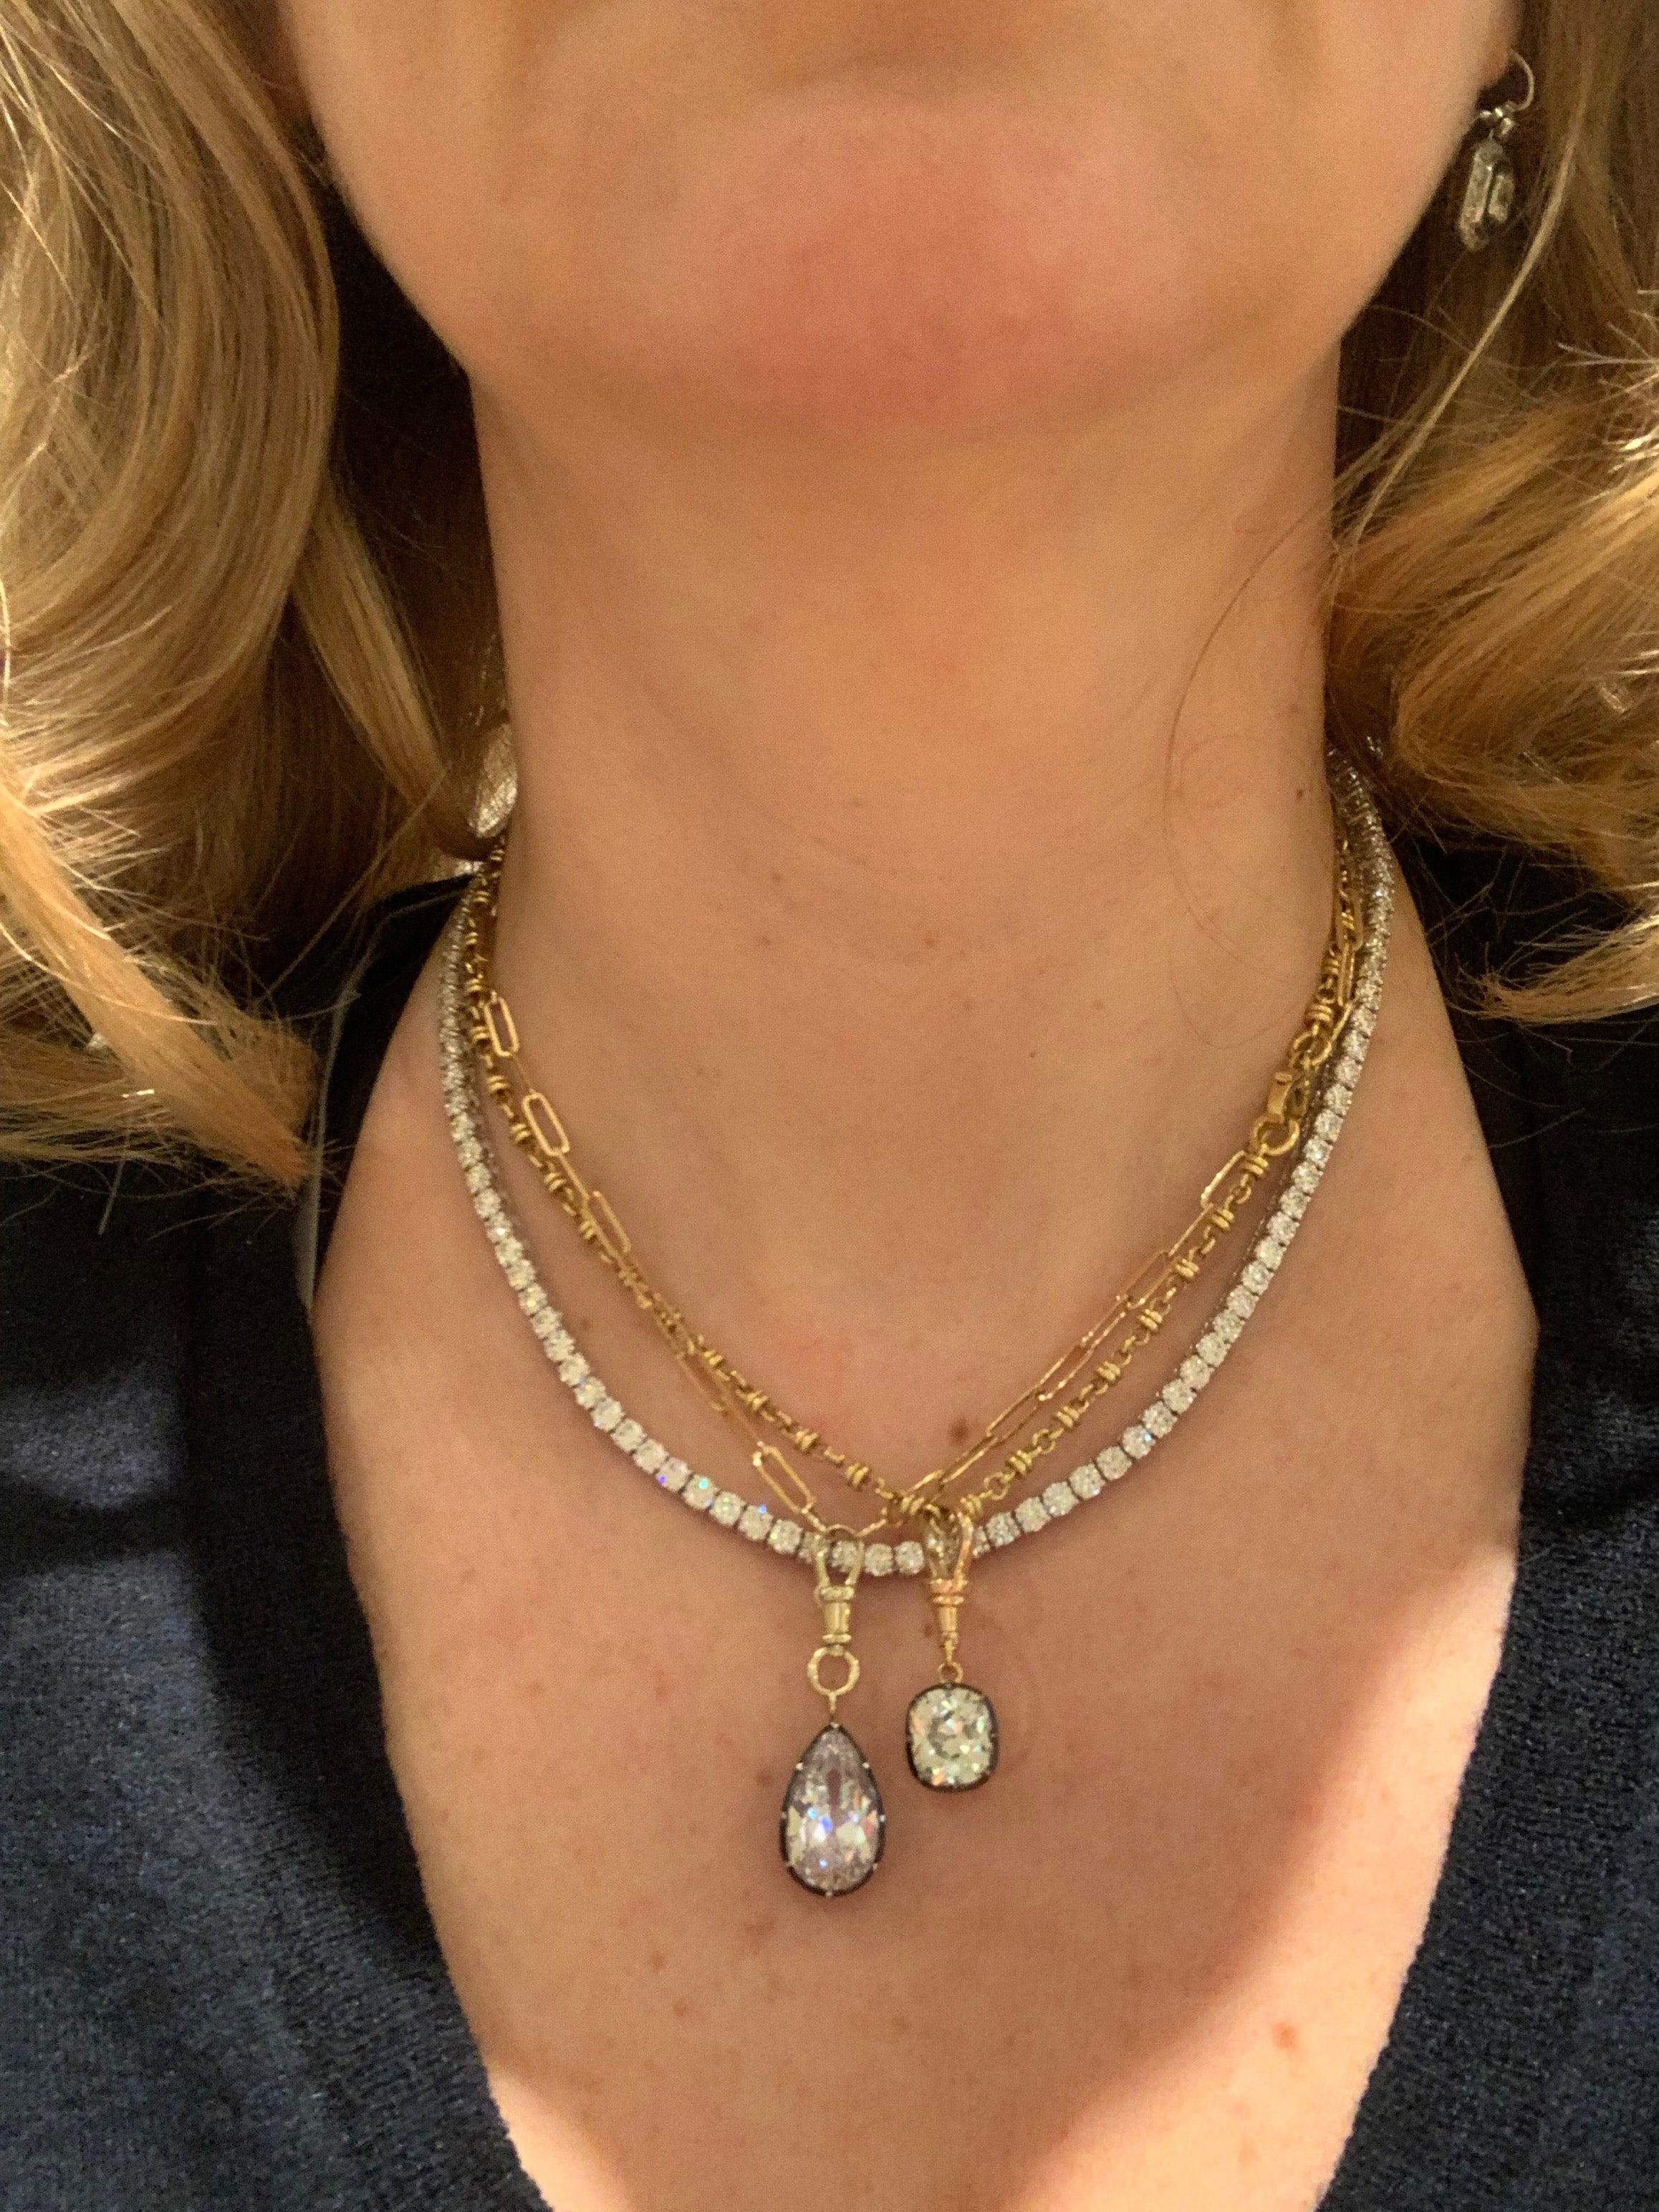 This gorgeous 16 Ct necklace will simply take your breath away! It features a 105 natural round brilliant cut diamonds.These sparkling diamonds conservatively grade as G VS1-SI1 in quality. The diamonds are set in white gold riviera or tennis style